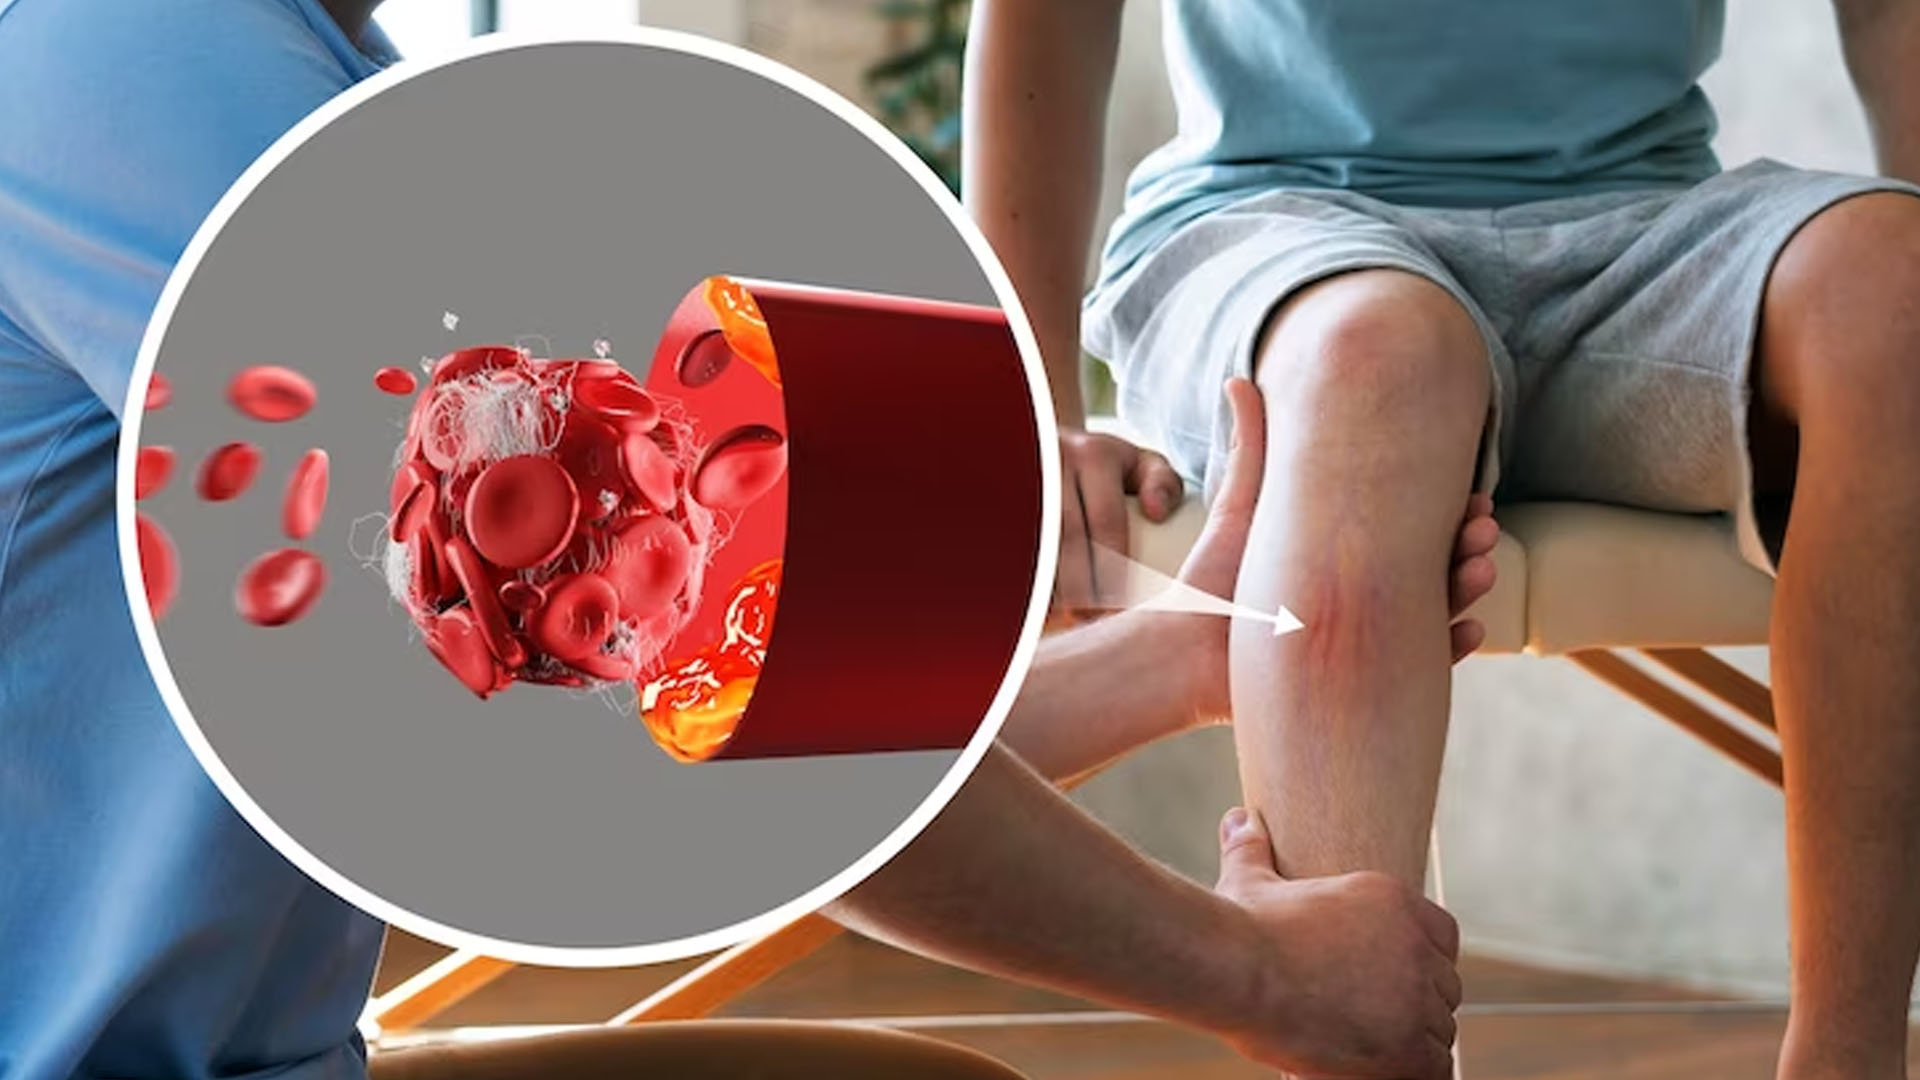 What are the Home Remedies to get relief from Varicose Vein pain?